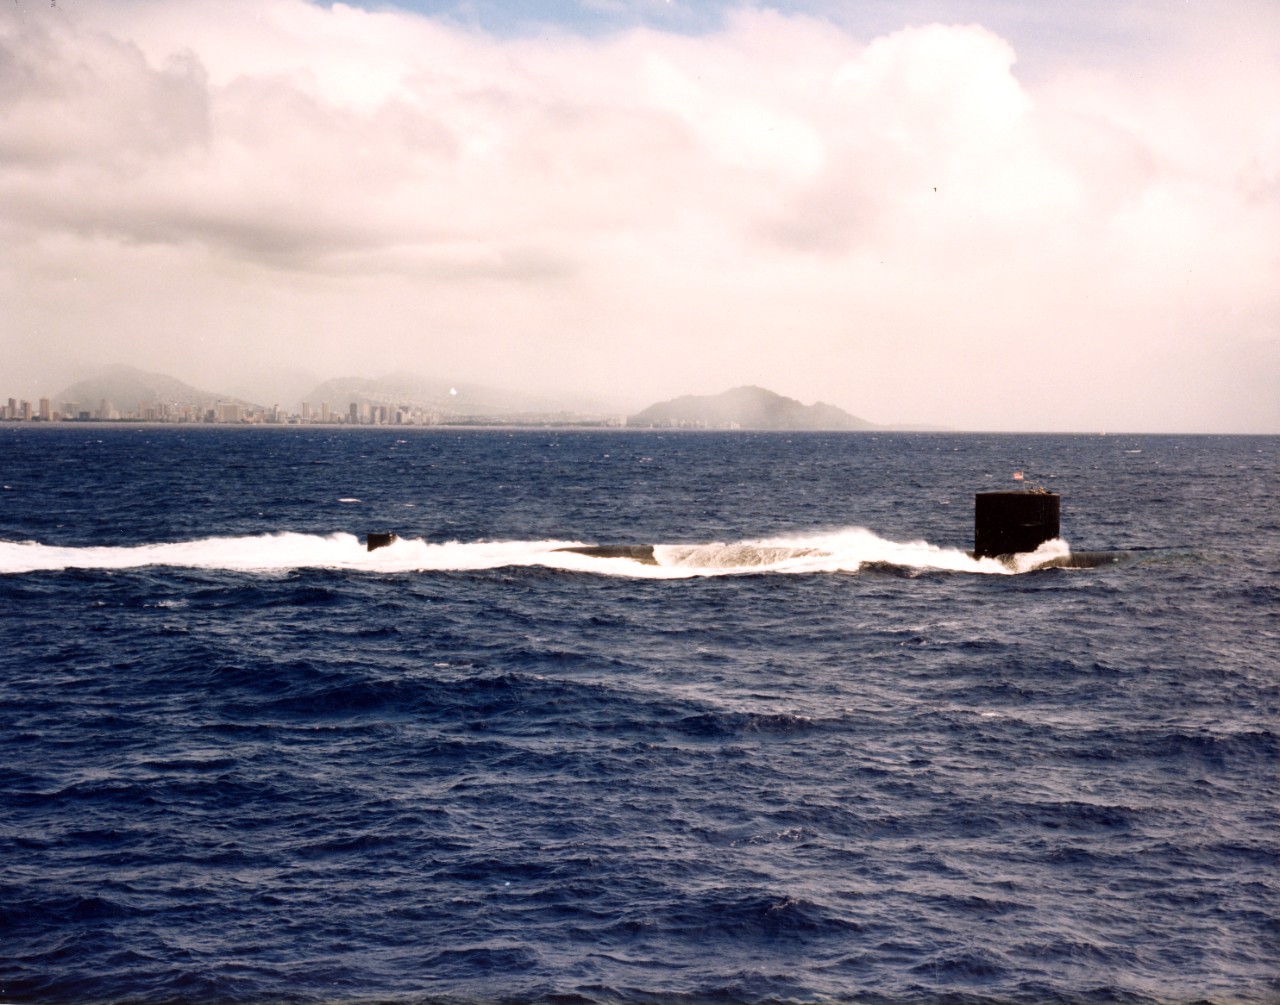 Nuclear powered attack submarine USS Silversides (SSN-679) underway on the surface, off the coast of Oahu, Hawaii